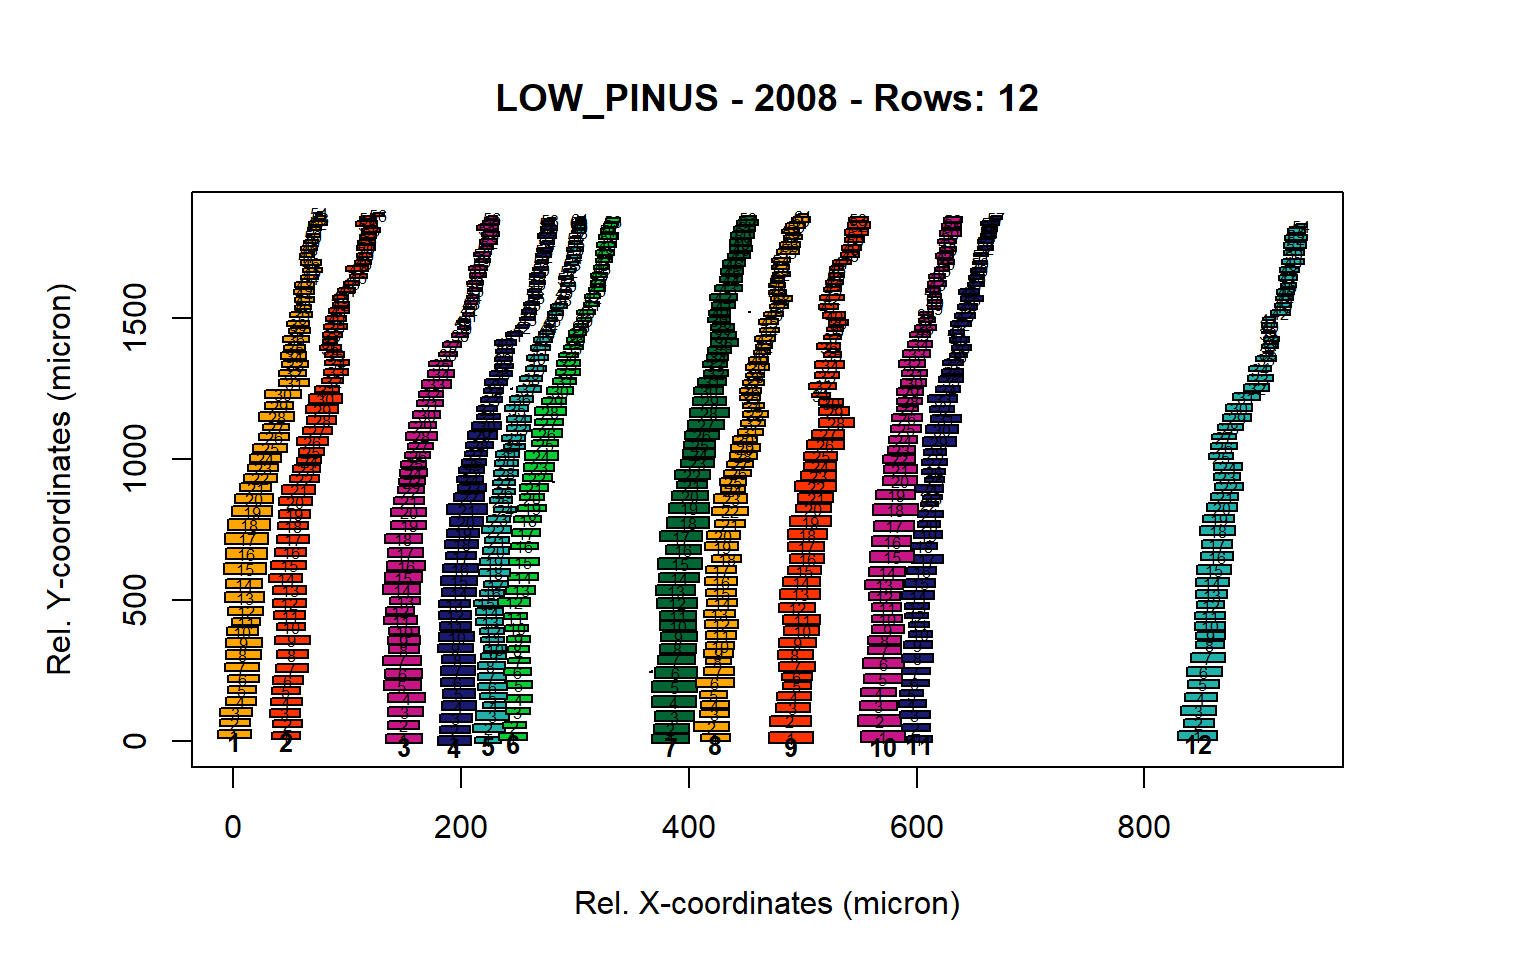 Standard plots generated by the write.output() function for lowland Pinus sylverstris (species="LOW_PINUS"), including 2007, 2008, 2009 and 2010.